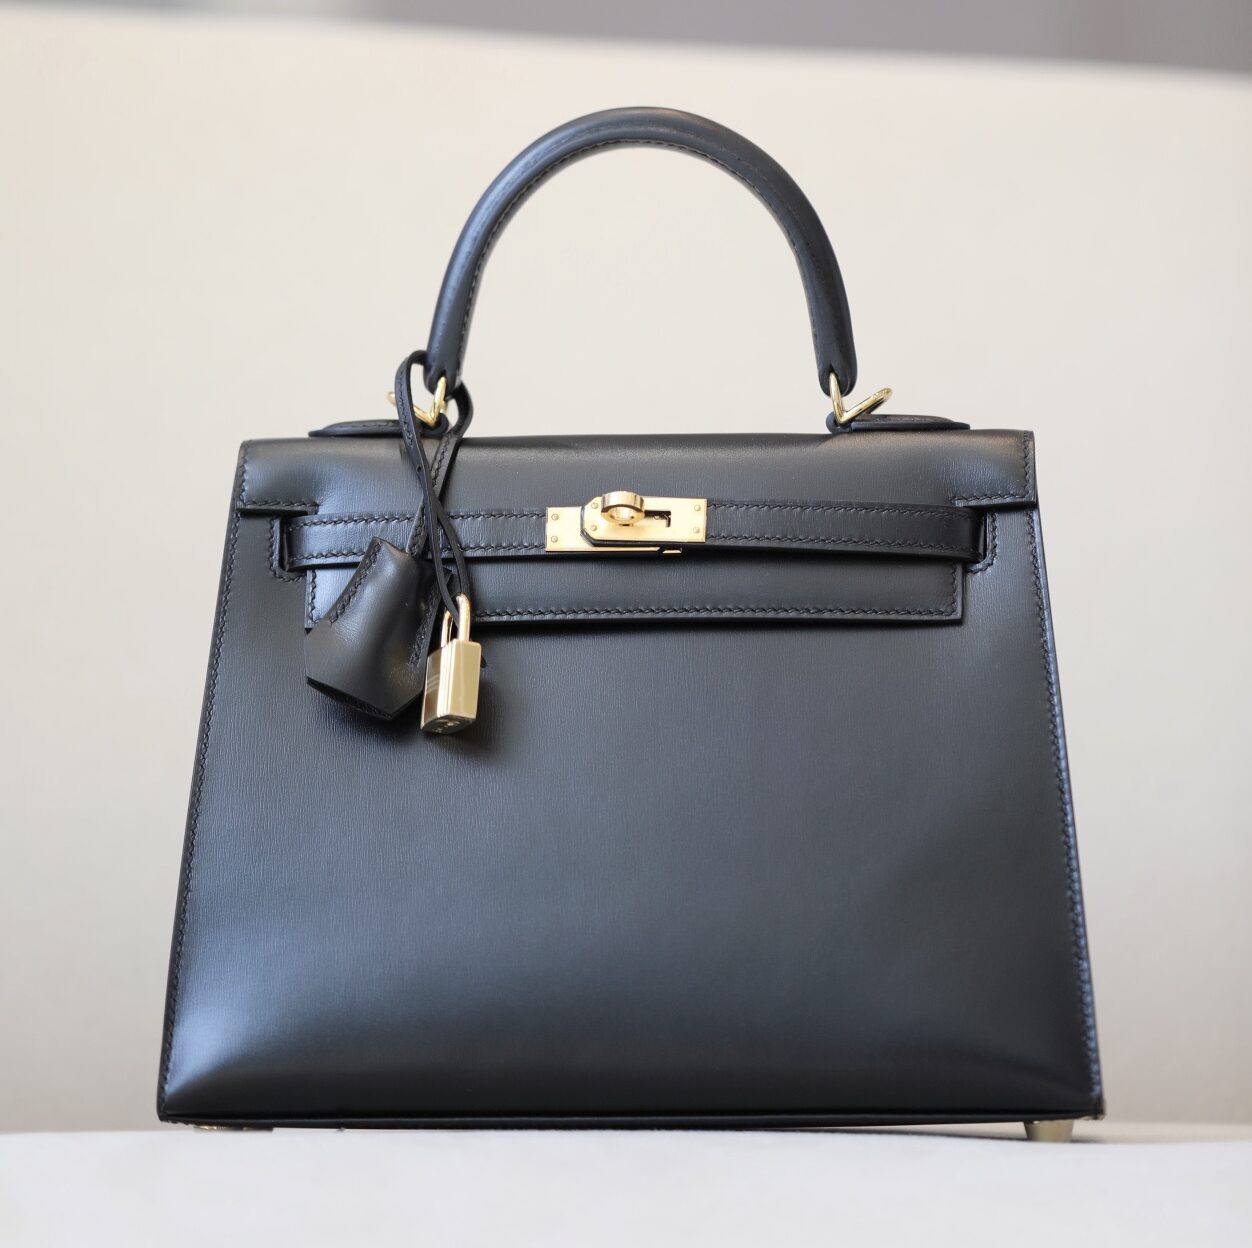 Uncle Bench Hermes Kelly Boxcalf so black black buckle 35cm